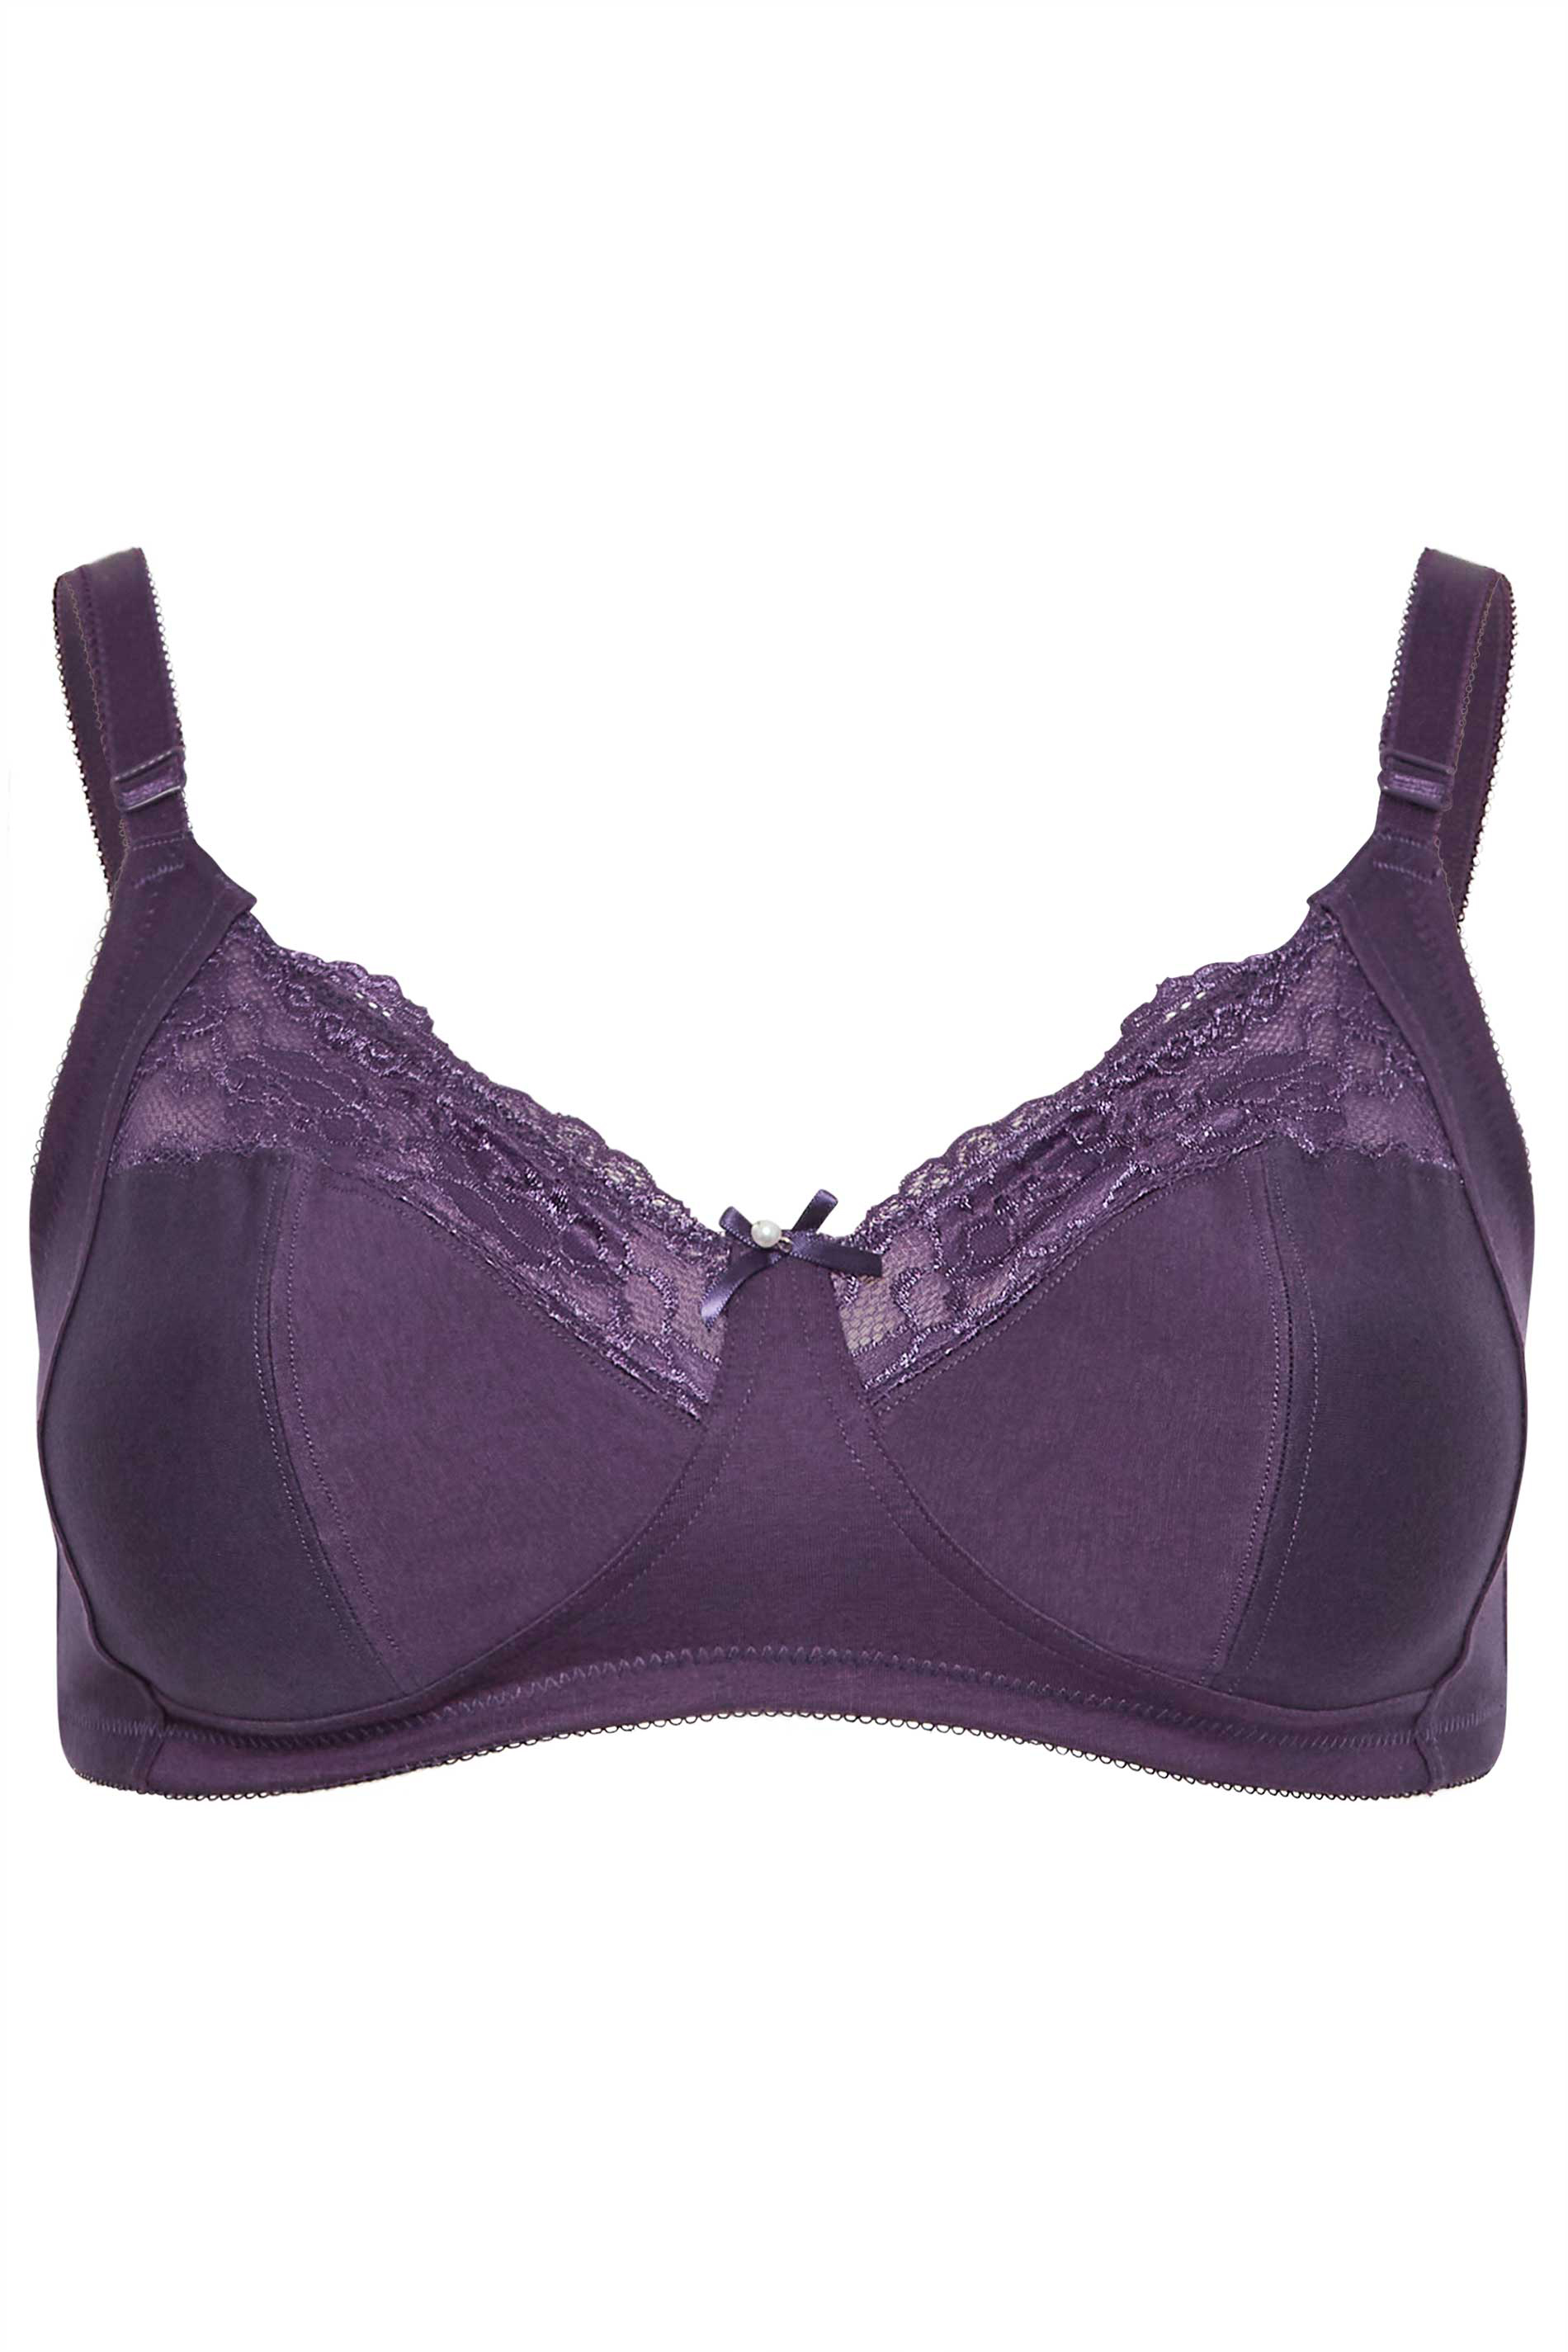 Lace Trim Non Padded Bra 2 Pack, Lingerie